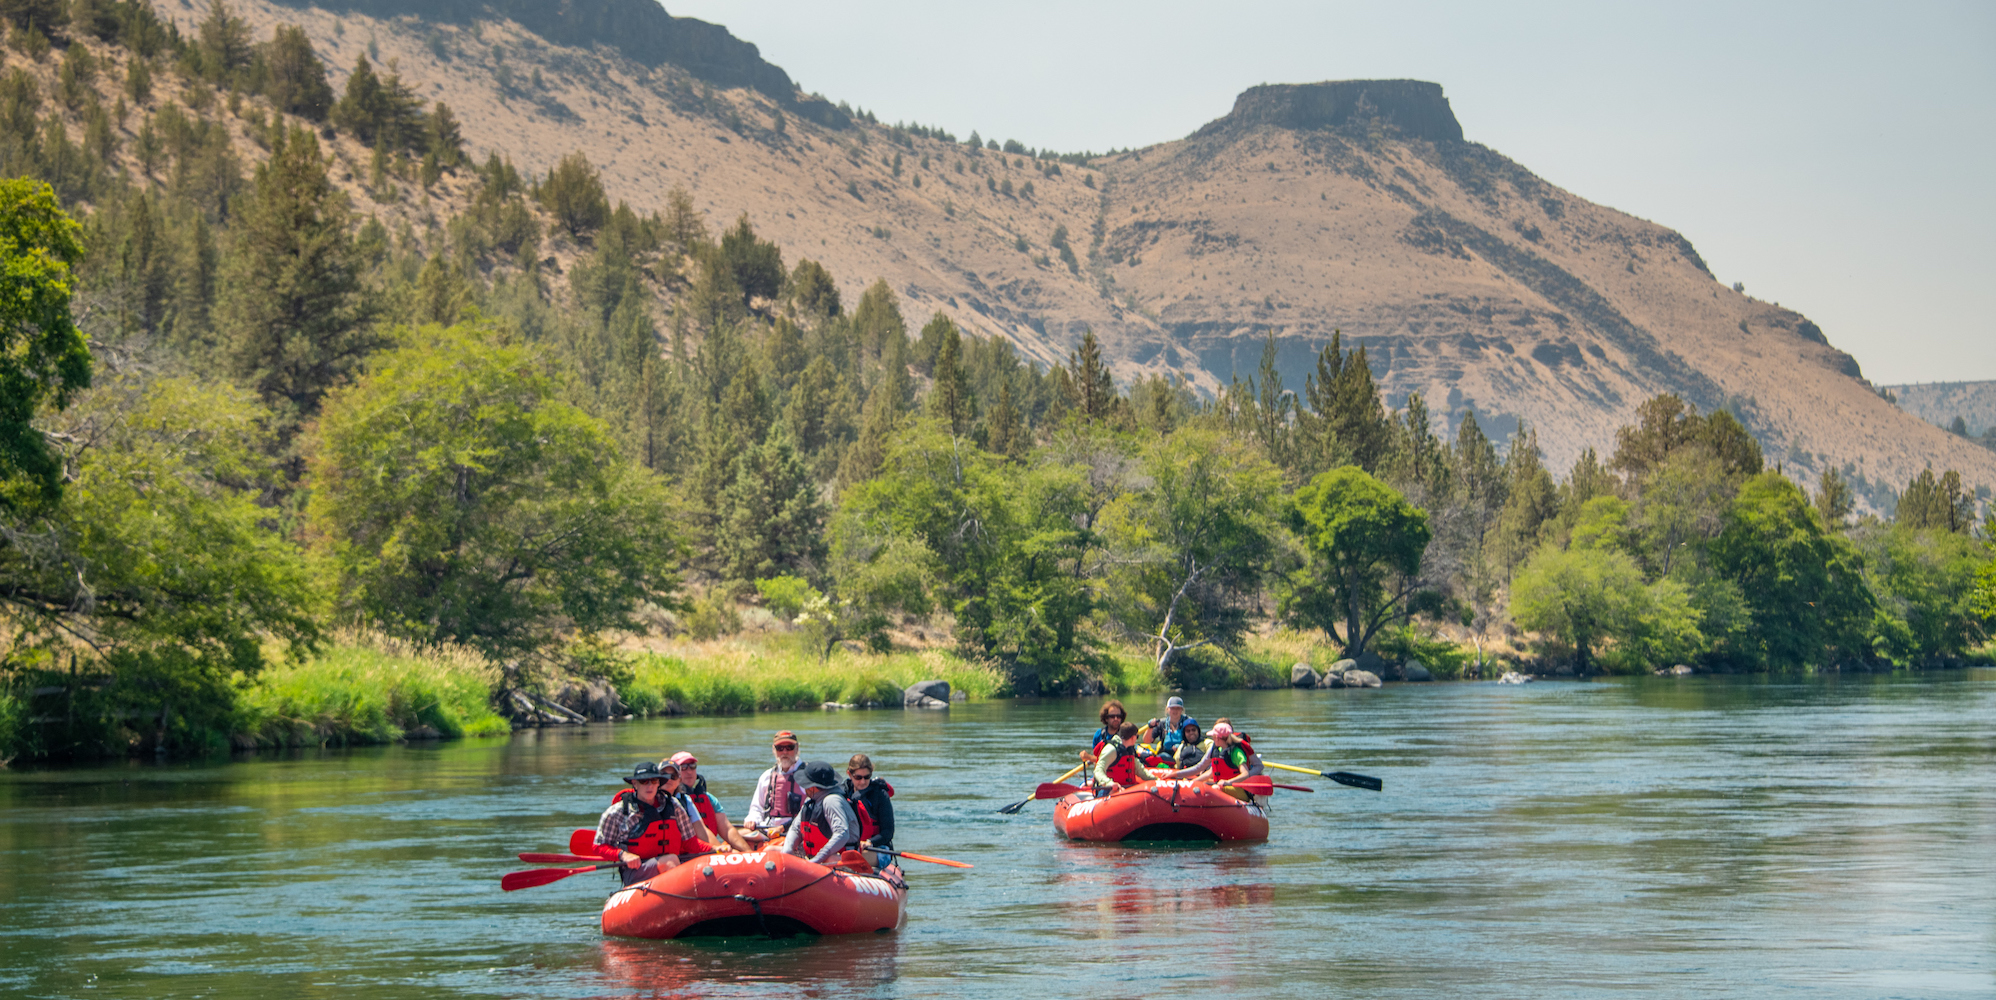 Two red rafts full of passengers paddling down the Deschutes River on a sunny summer day